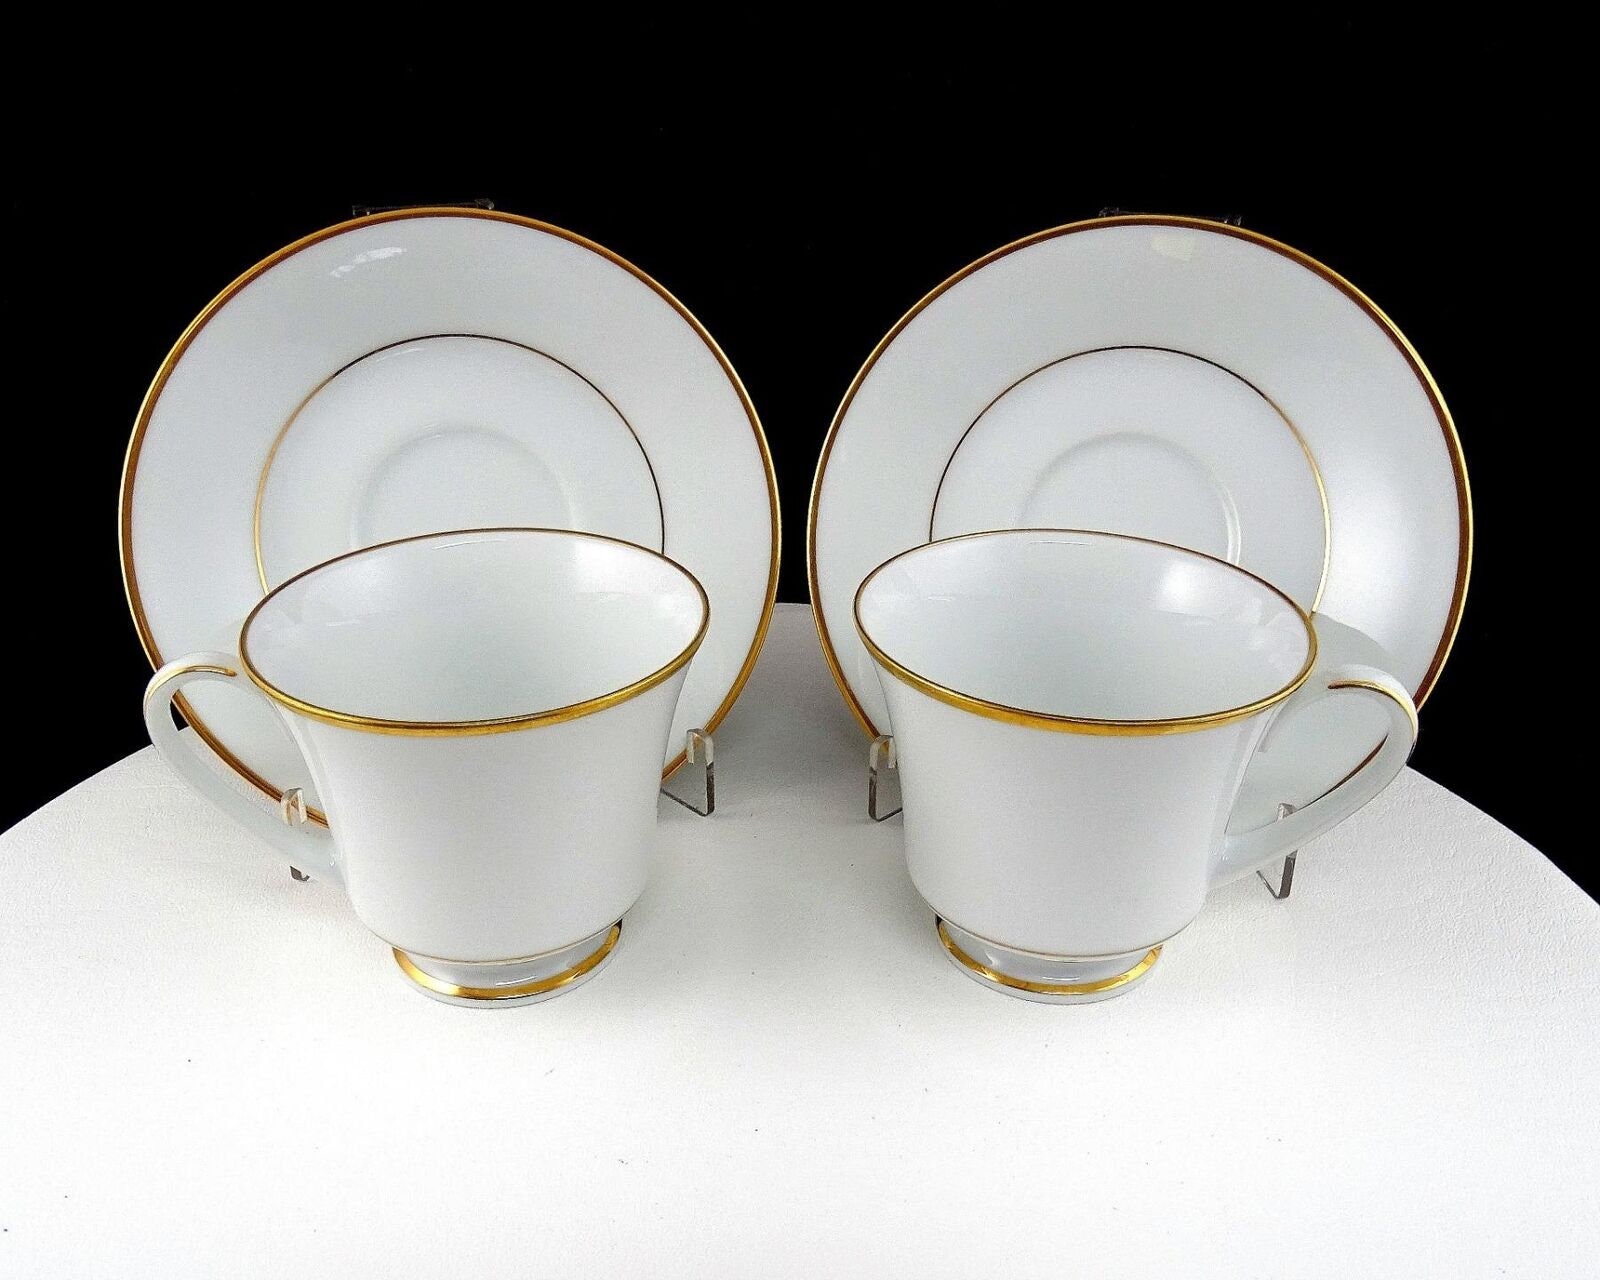 NORITAKE JAPAN CHINA DYNASTY #2018 GOLD & WHITE 4PC 6 3/8" BREAD & BUTTER PLATES 